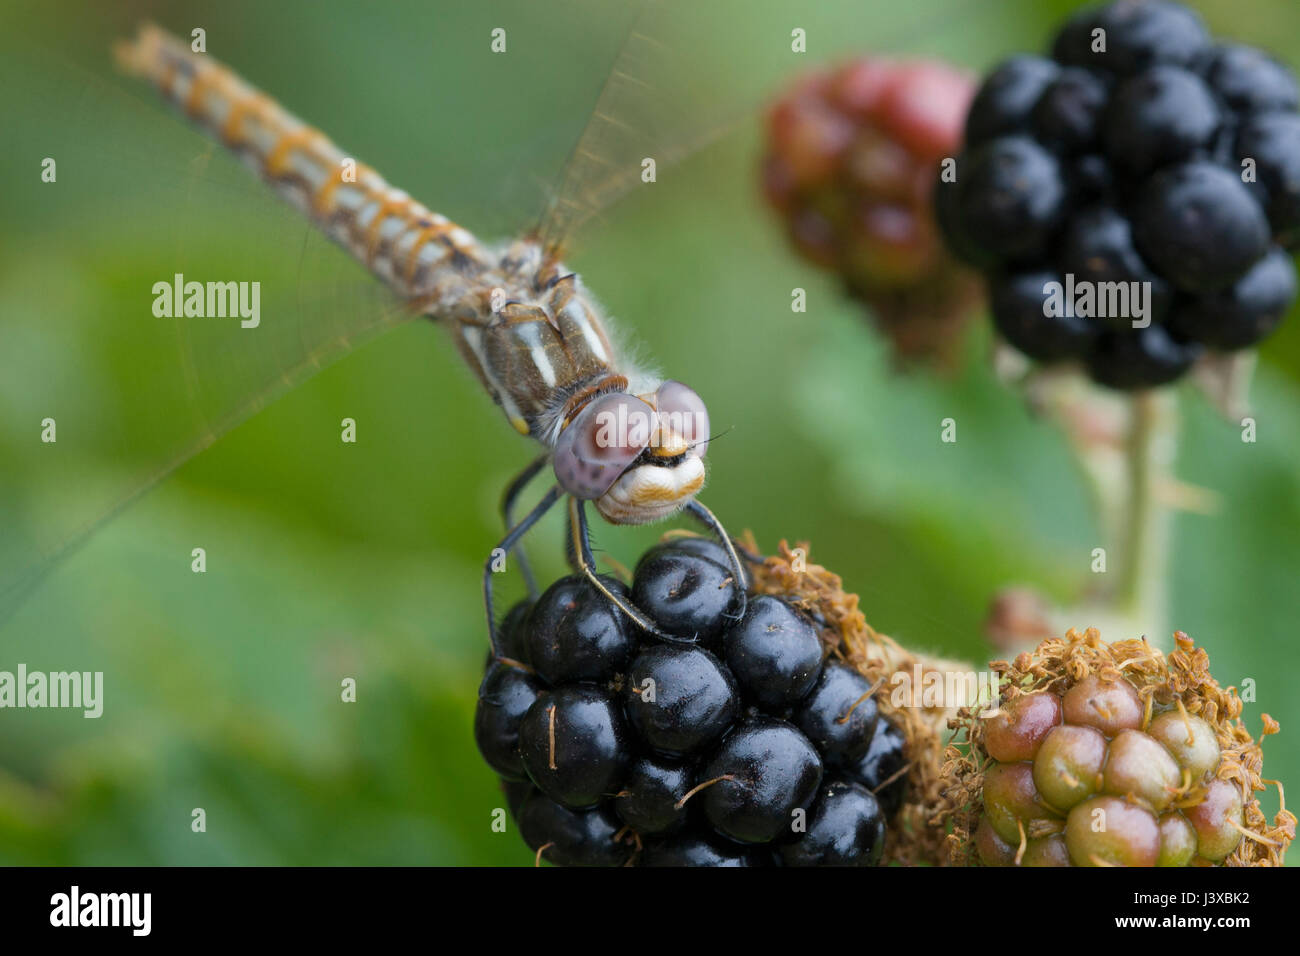 Dragonfly beginning to take off from a blackberry. Stock Photo